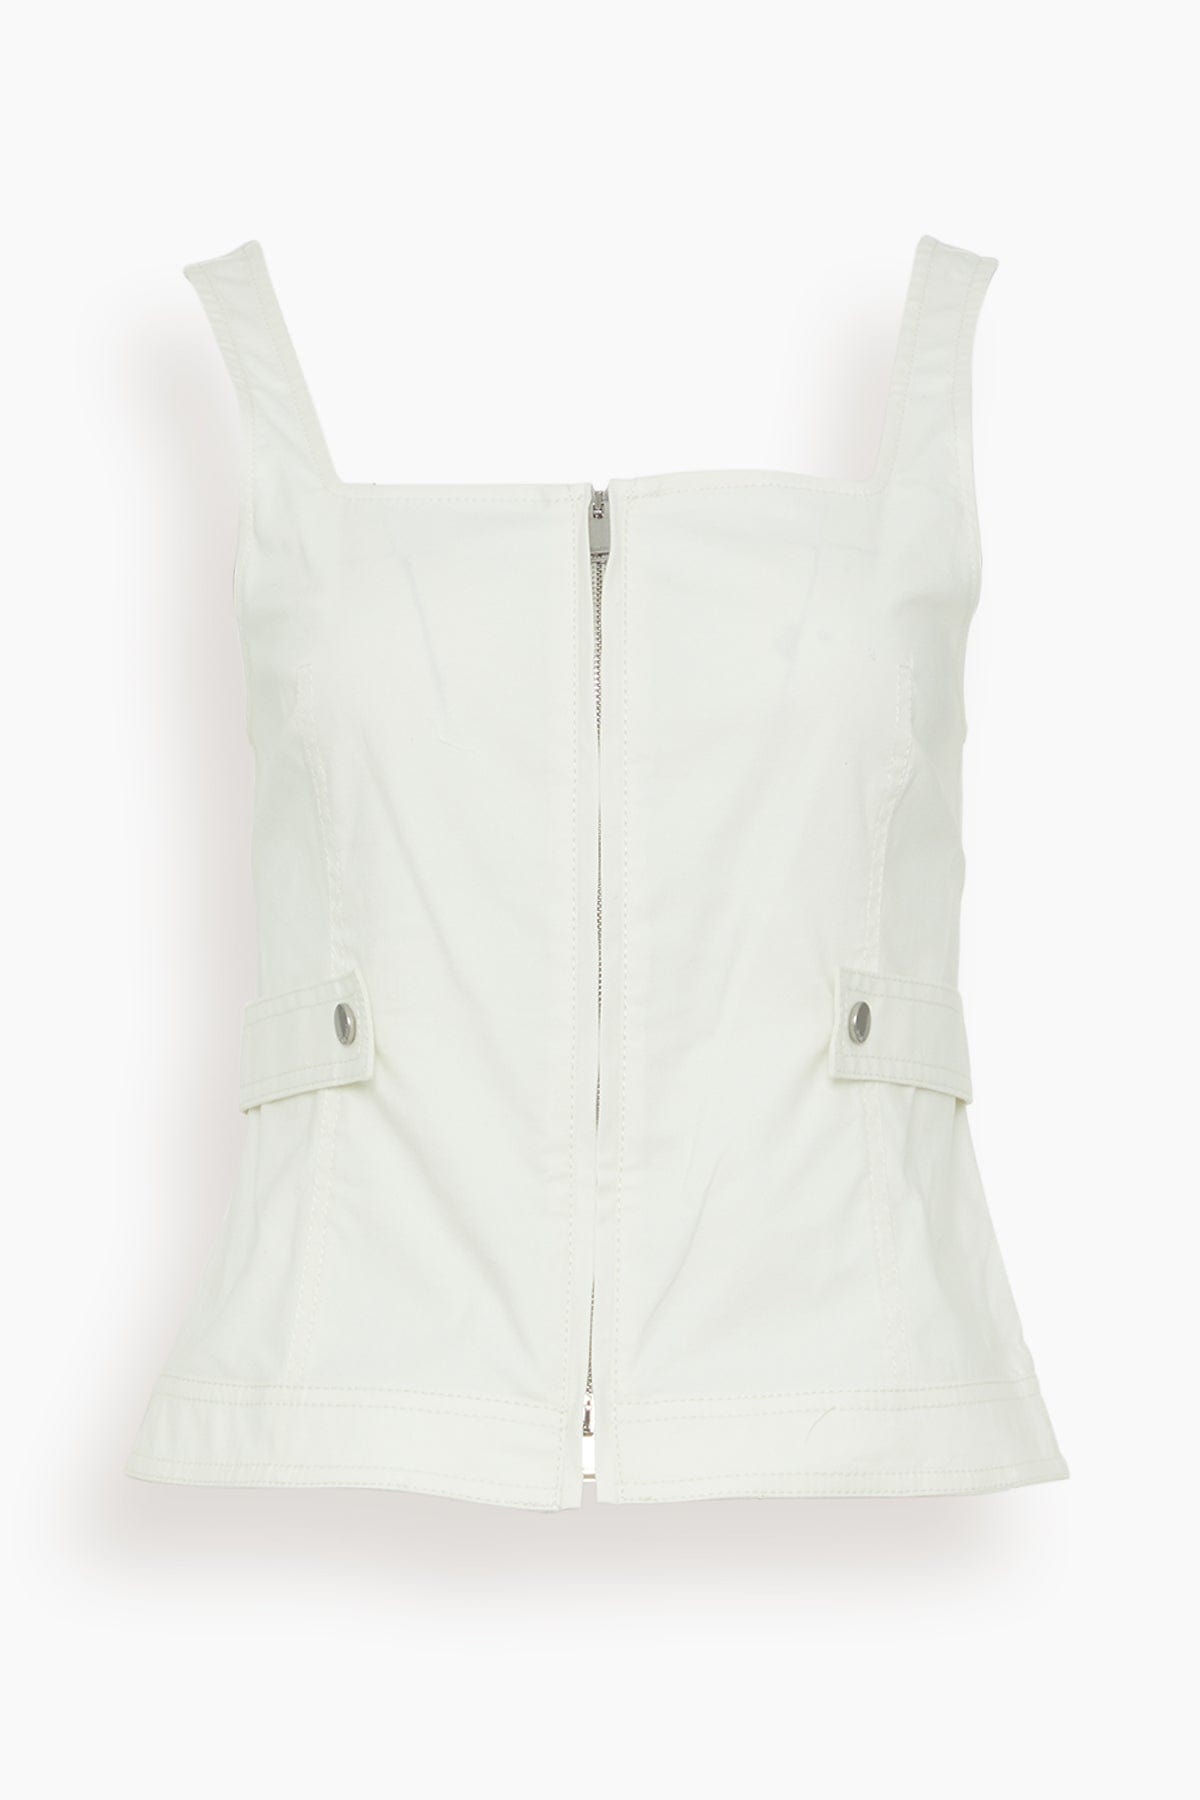 Simkhai Tops Dolce Zip Up Top in White